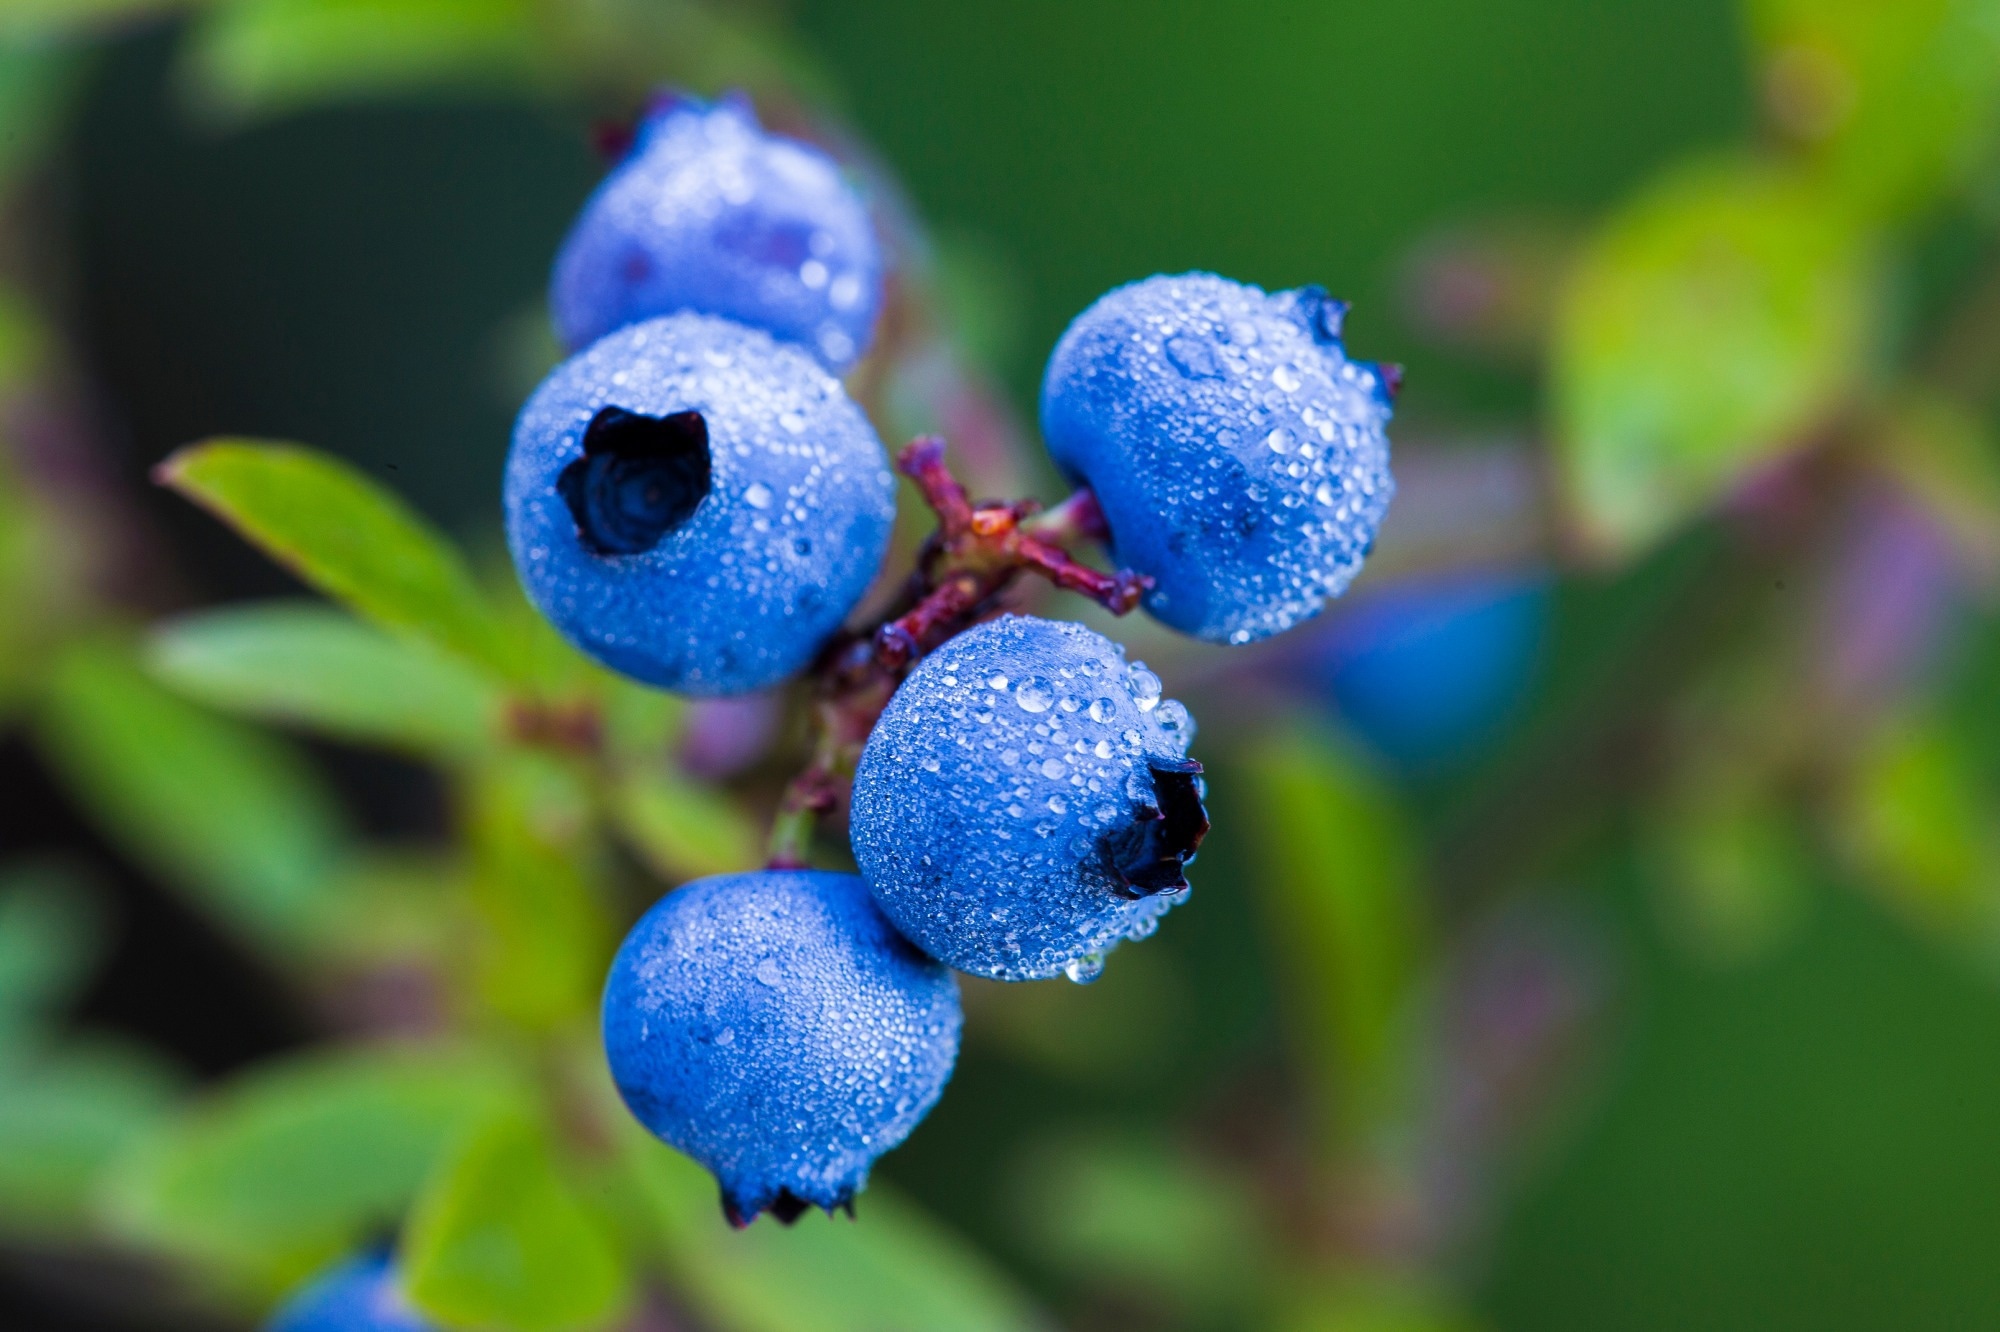 Blueberries a tasty intervention against age-related cognitive decline – News-Medical.Net